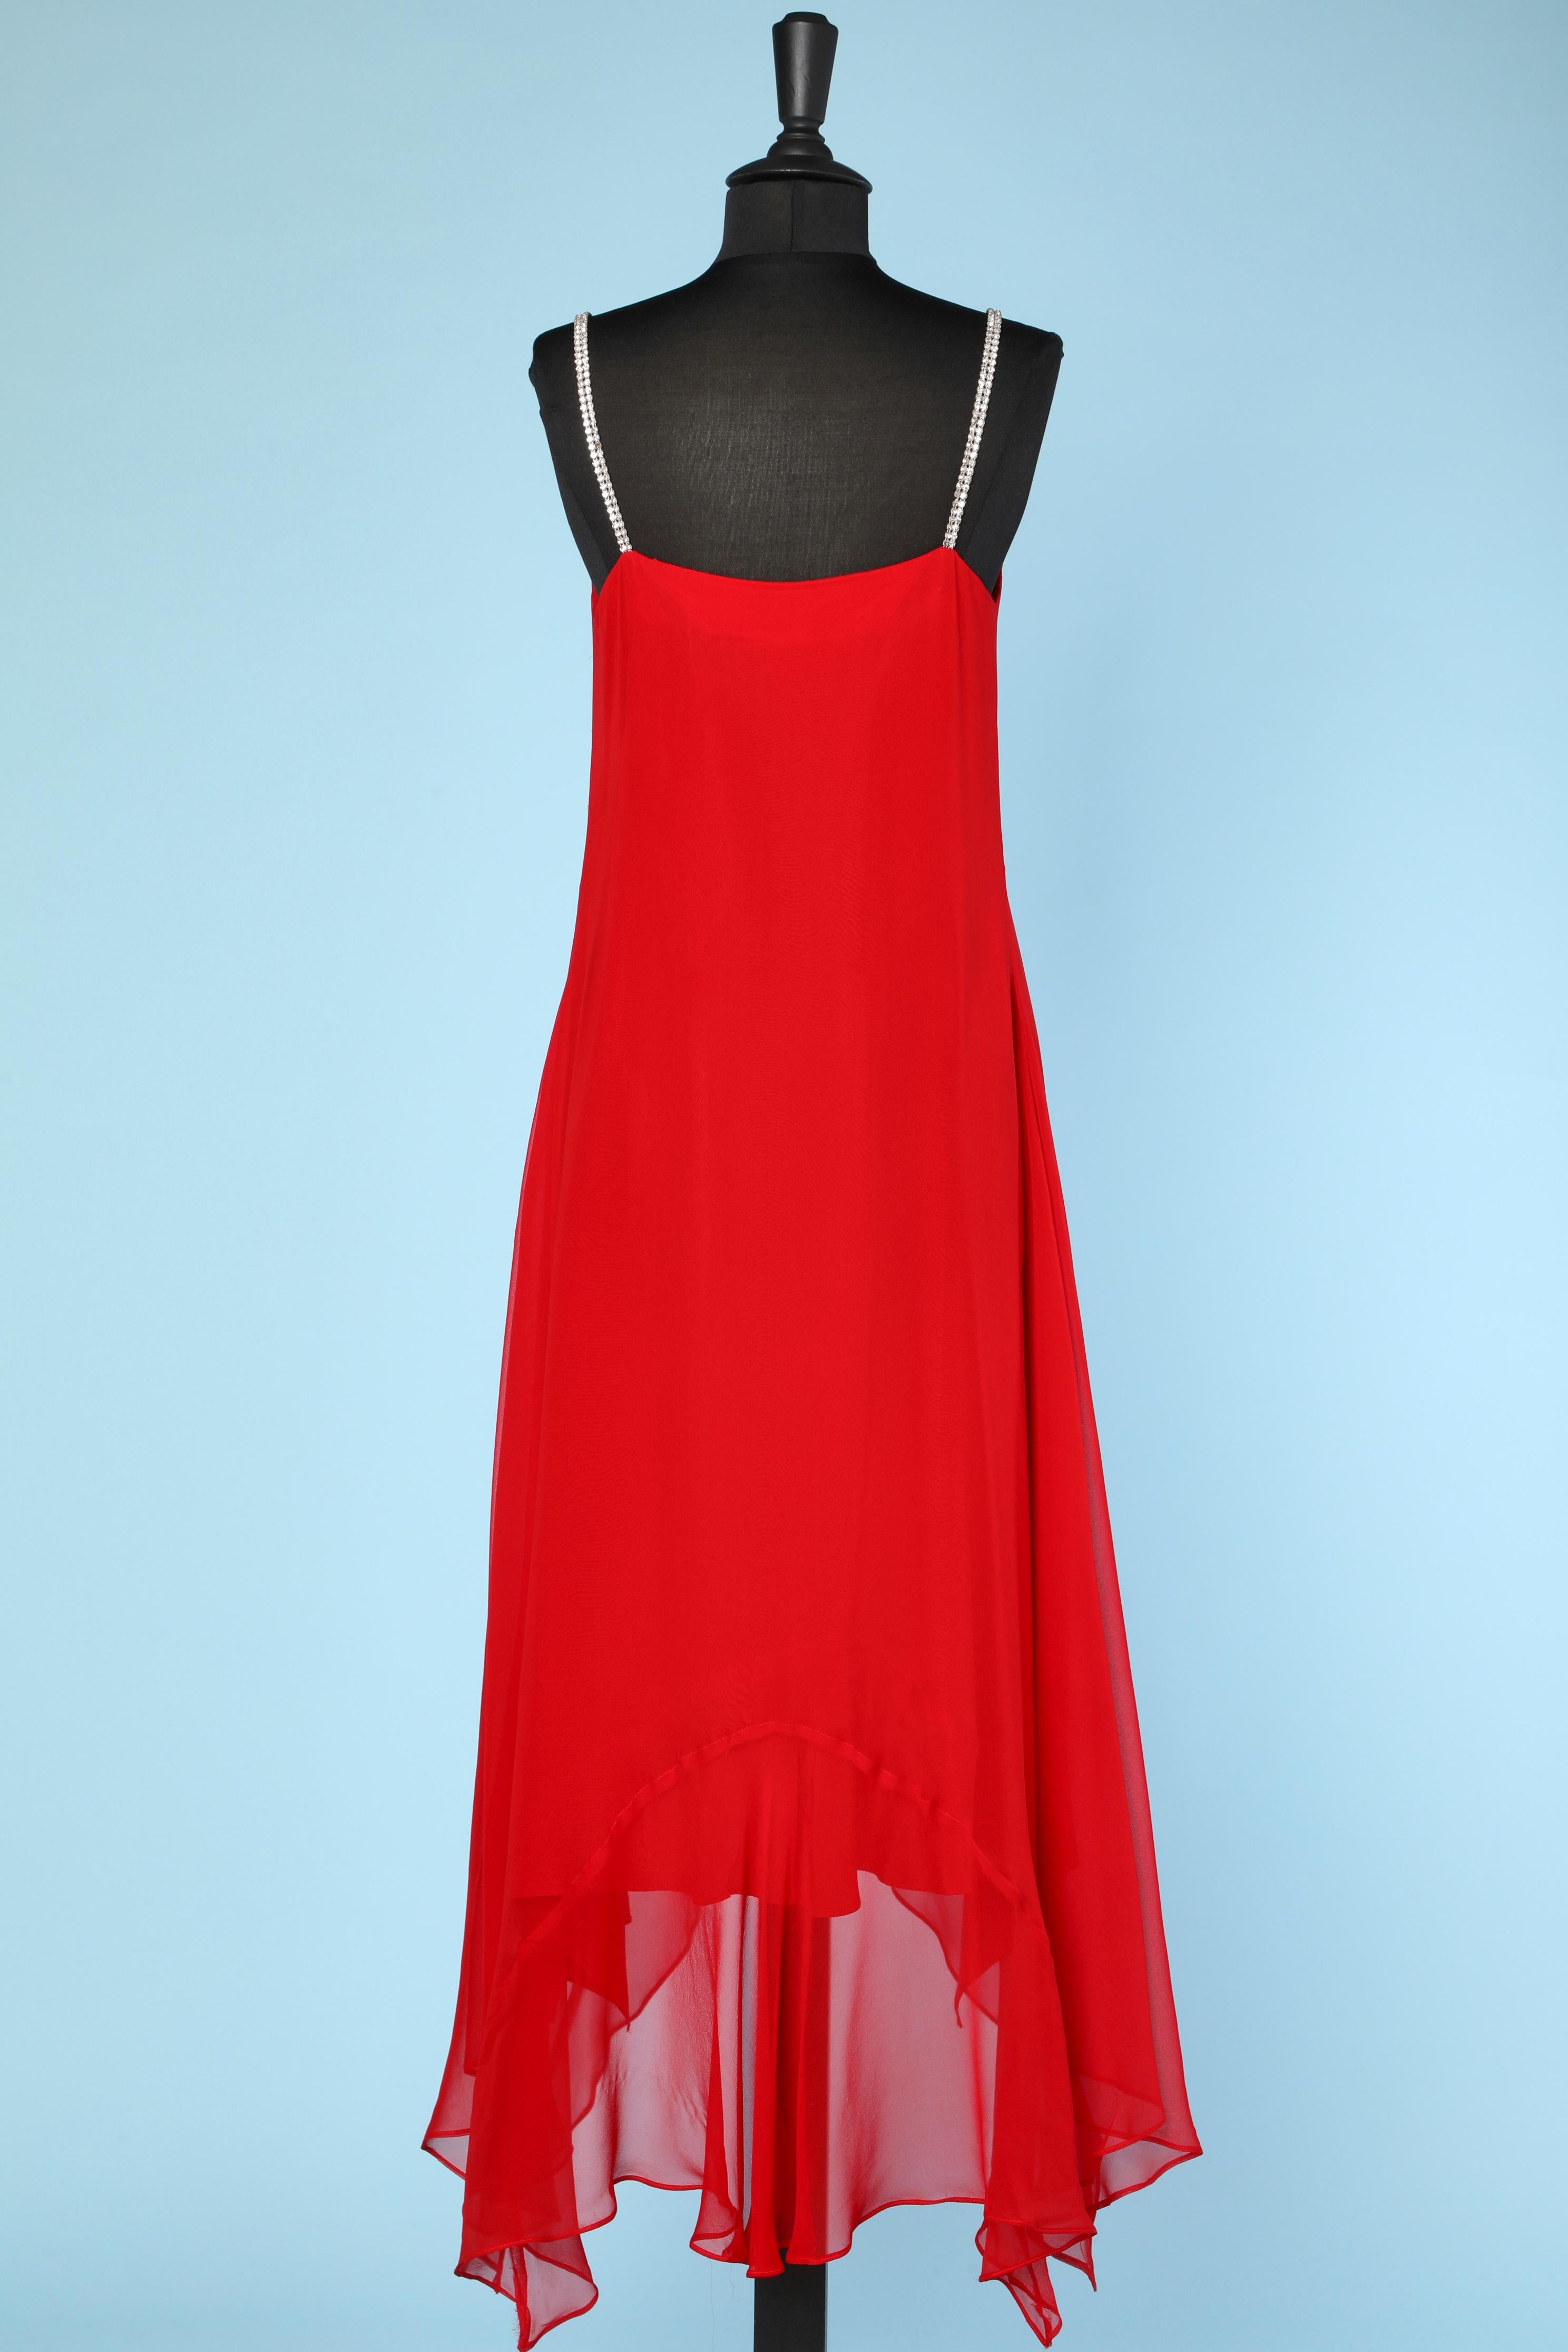 Red chiffon evening dress and cape, rhinestone shoulder straps and buckle 1960's 1